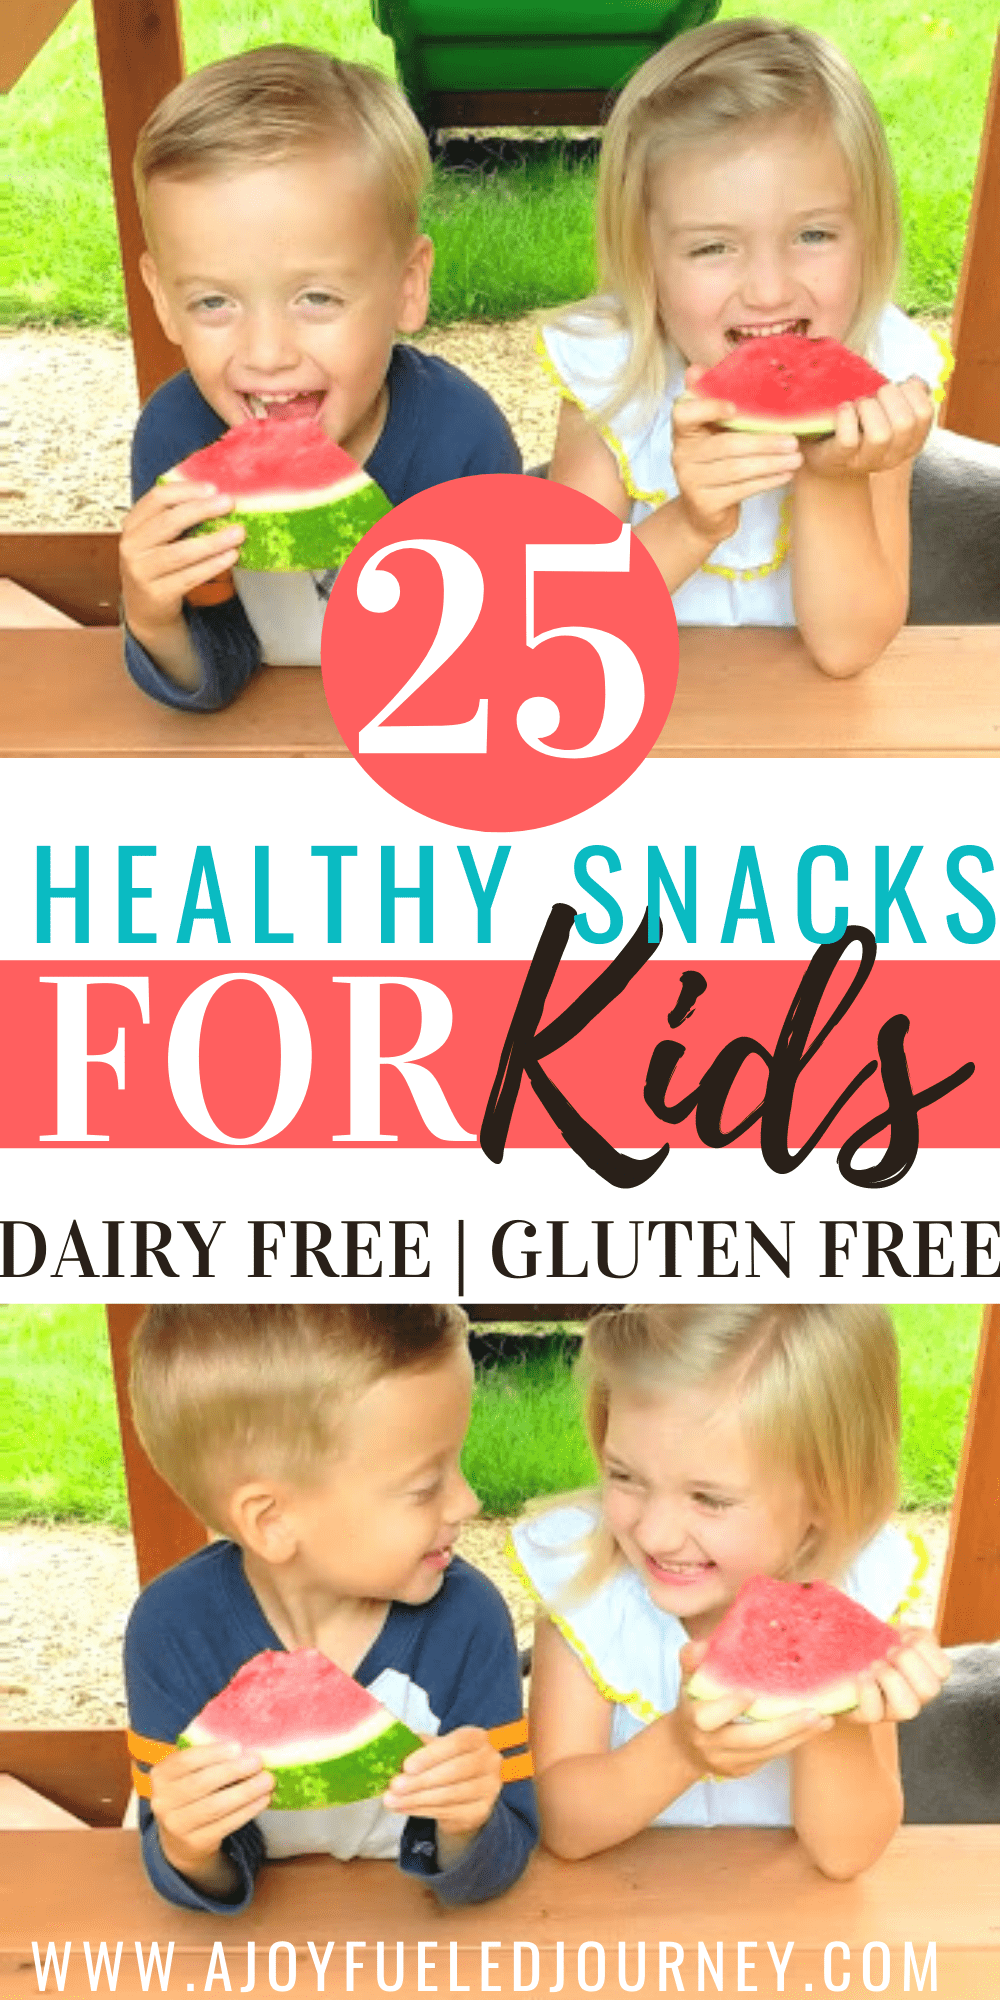 25 Healthy Snack Ideas For Kids - A Joy Fueled Journey